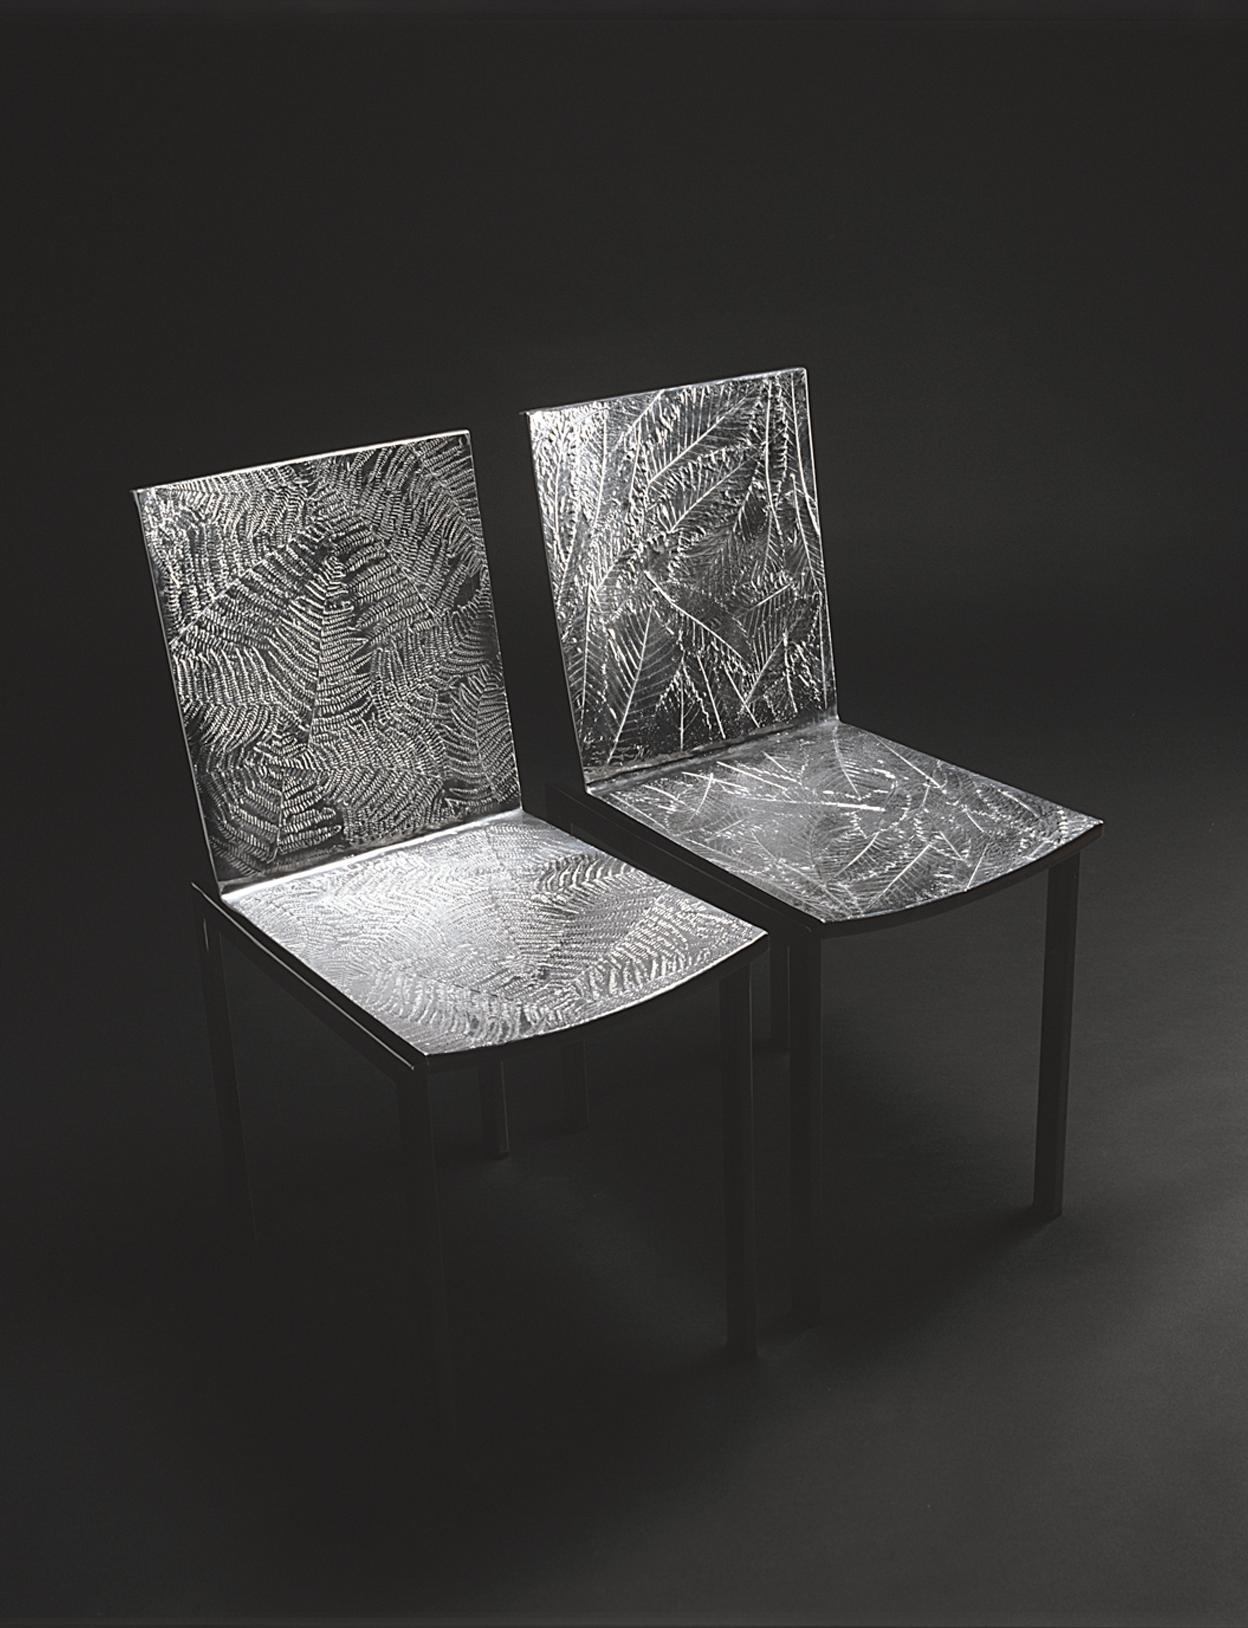 Dining chair in aluminium casting seat and shiny stainless steel structure. The textured surface is created with panels made in aluminium casting with four different leaf textures: chestnut leaf, fern, ivy and pine needles. 
This chair is suitable